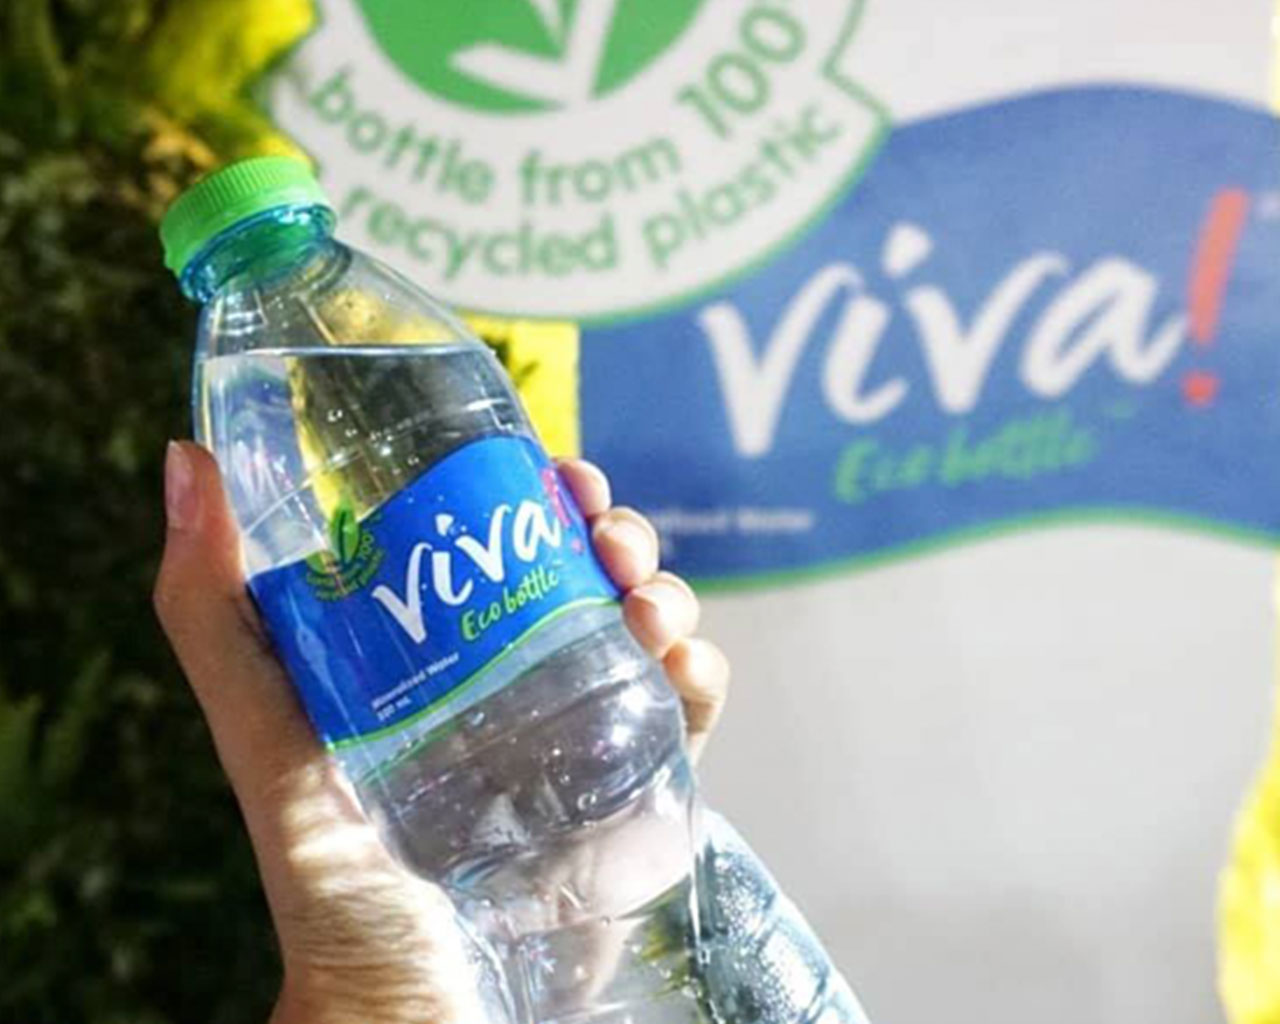 Detail of a hand holding a Viva Eco bottle